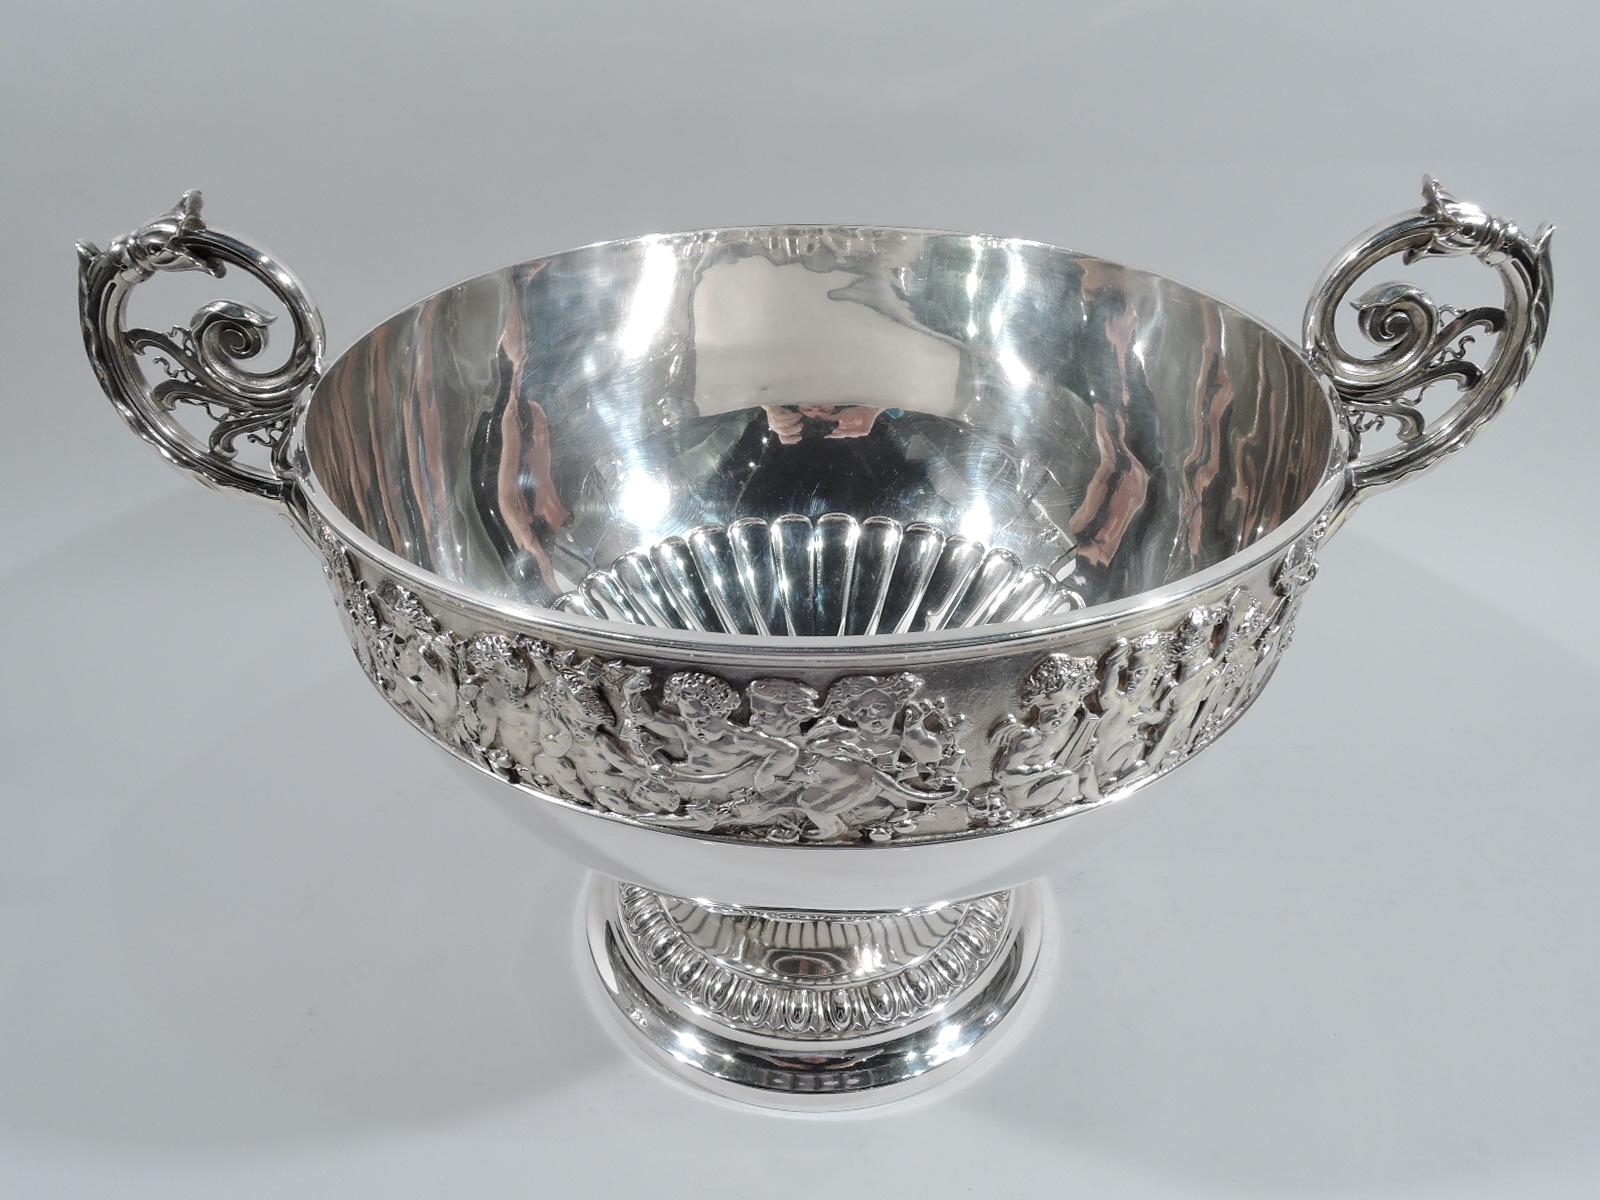 Victorian sterling silver bowl. Made by Elkington & Co. Ltd in Birmingham in 1896. Round and tapering with crowded cherubic frieze: Harp strummers, pipe blowers, and tambourine janglers with a few grape gorgers and goat huggers mixed in. A